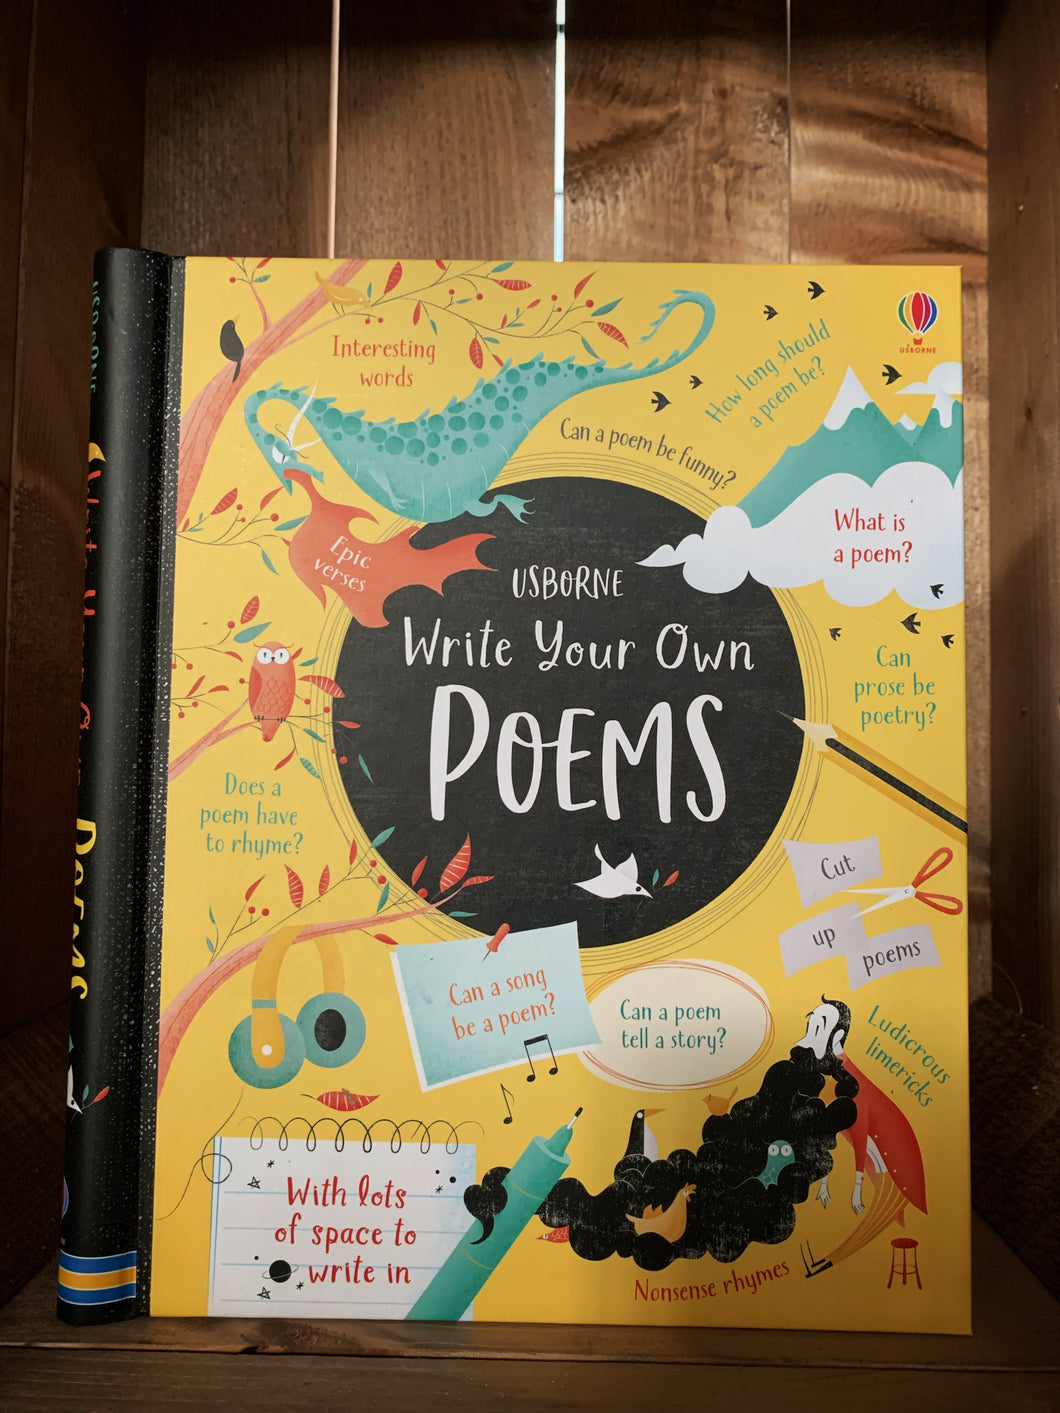 Image of the front of the book Write Your Own Poems. The cover background is bright yellow with a red spine. The title is written inside a black circle in the center. Surrounding the circle are various illustrations, including a dragon, mountains, pens and pencils, and  man with a long black beard full of types of birds. There are small amounts of text around the images explaining what the book can help with, including what is a poem, and does a poem have to rhyme. 